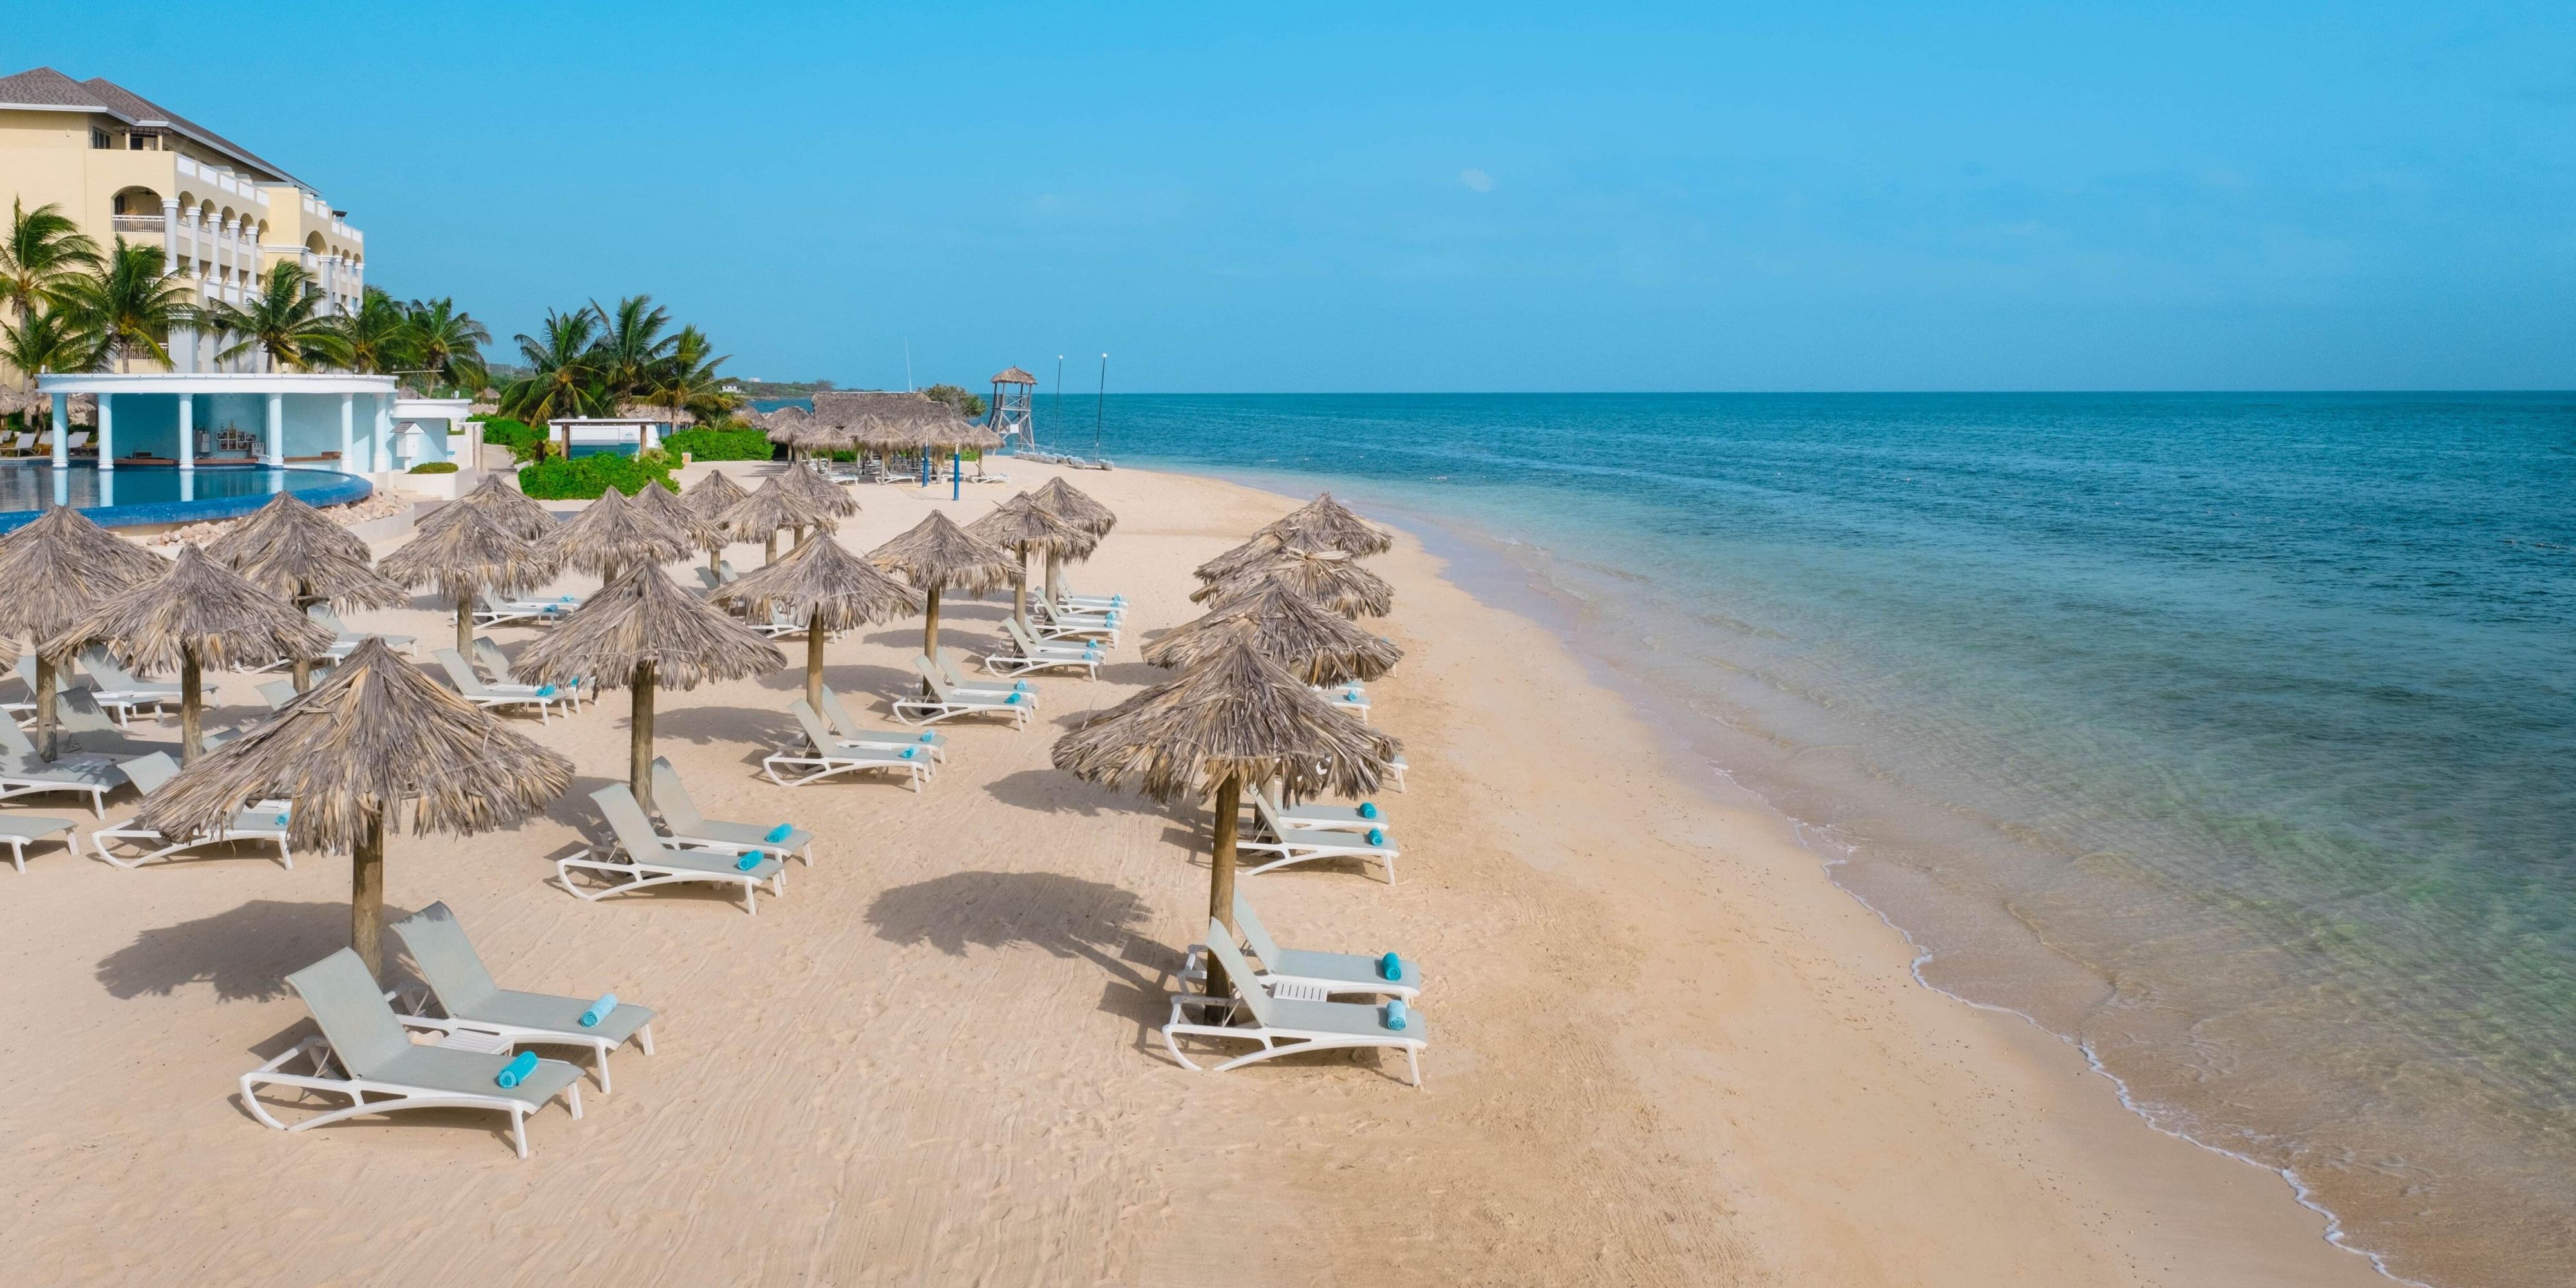 View of lounge chairs and thatch umbrellas on the beach in Montego Bay